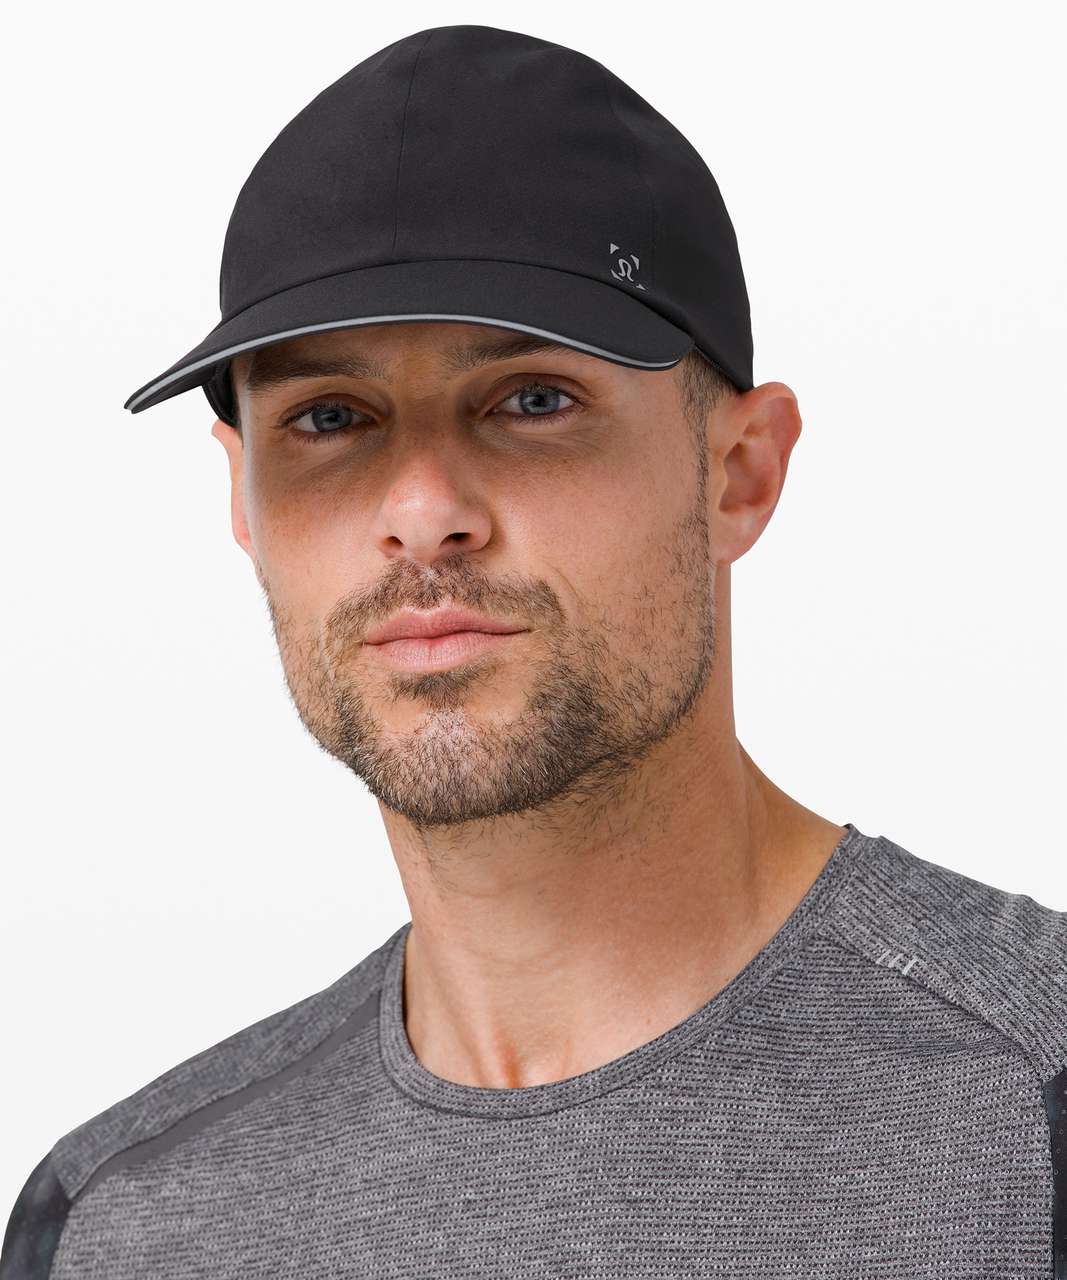 Lululemon Fast and Free Run Hat - Black (First Release)